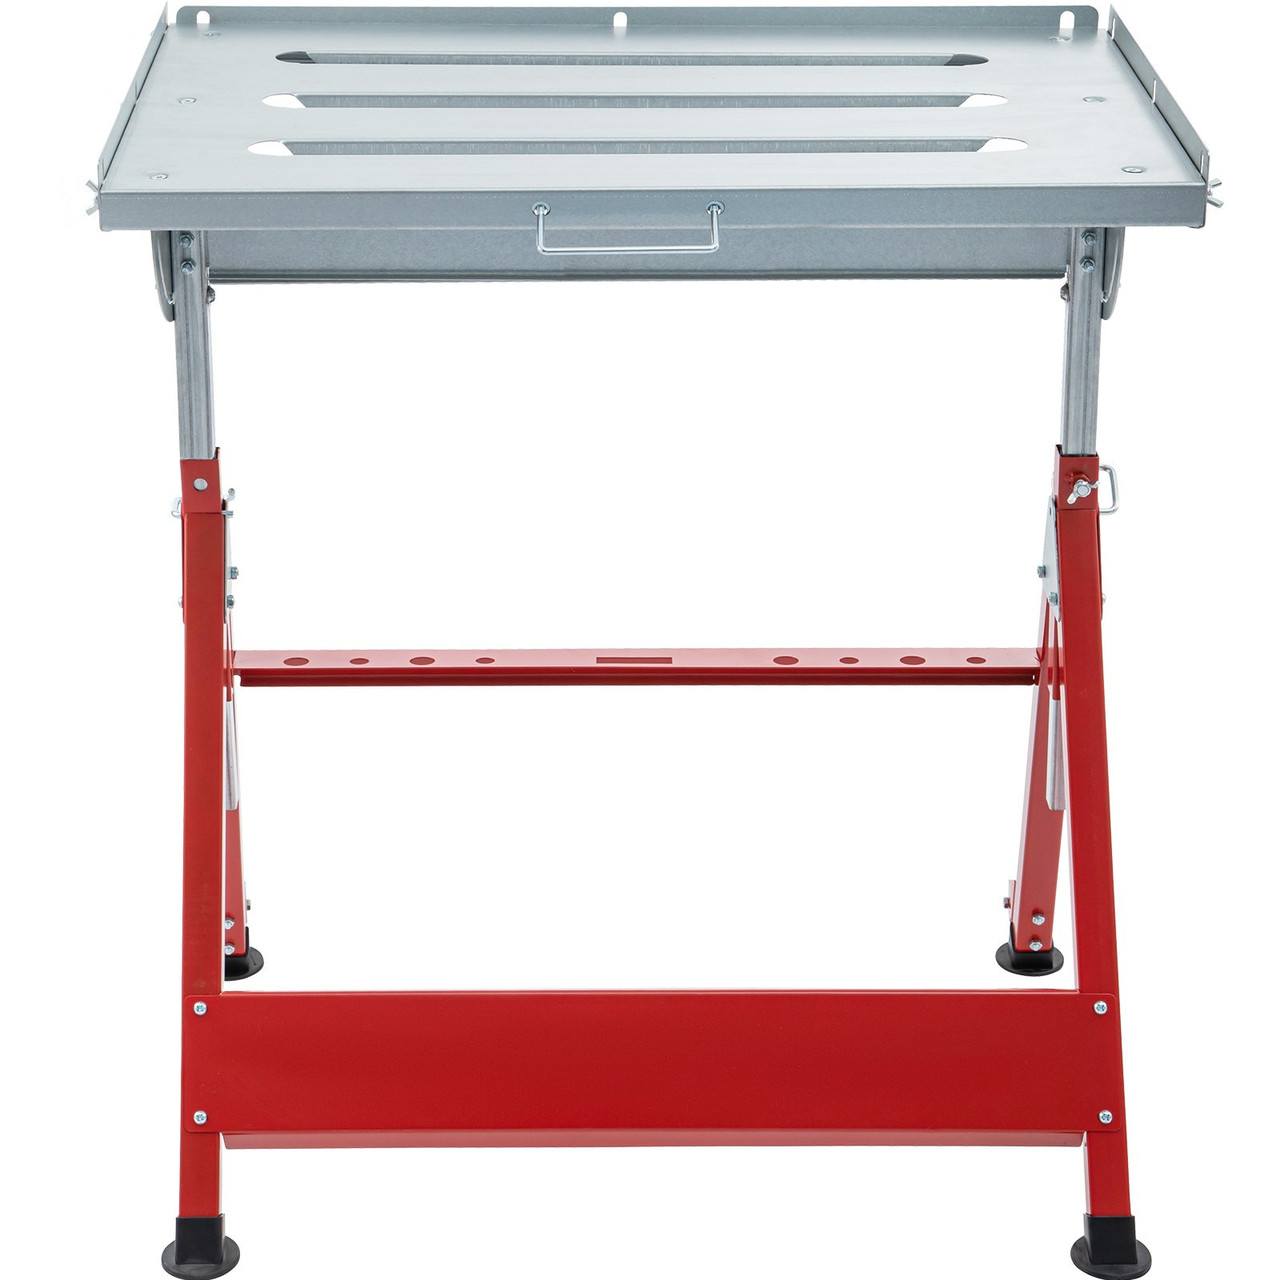 Welding Table 31'' x 23'' Steel Welding Table Nine 1.1 in. / 28mm Slots Welding Bench Table Adjustable Angle & Height Portable Table, Casters, Retractable Guide Rails, Eccentric Leveling Foot